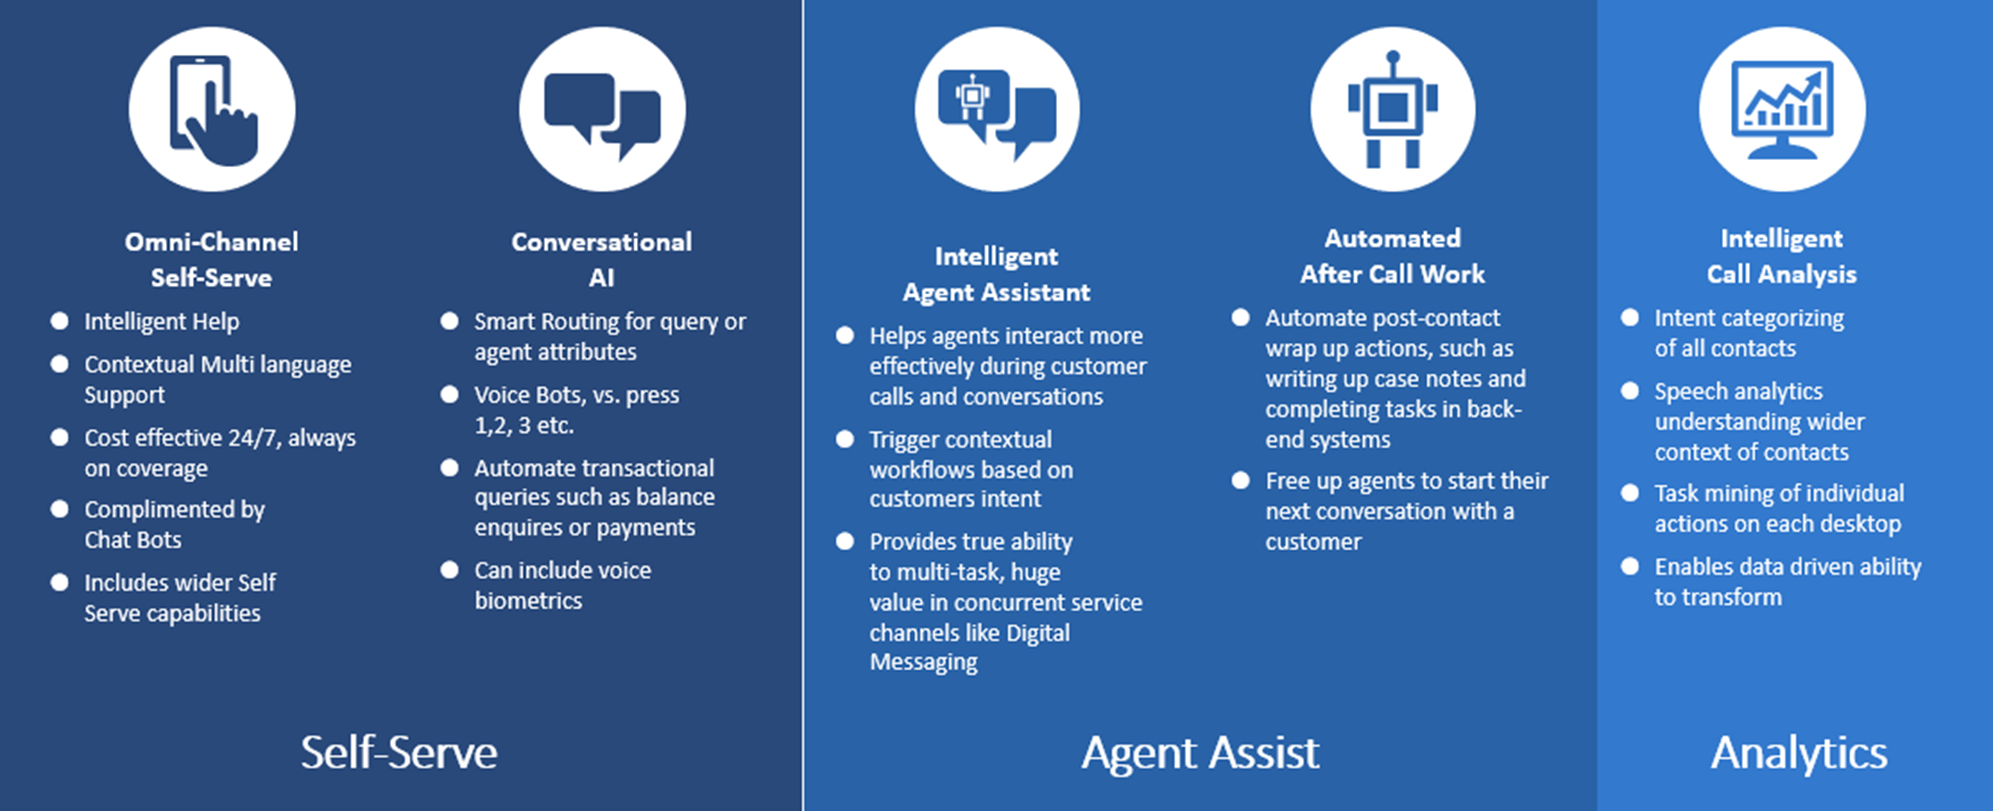 Contact Center Automation Self-Serve Agent Assist Analytics